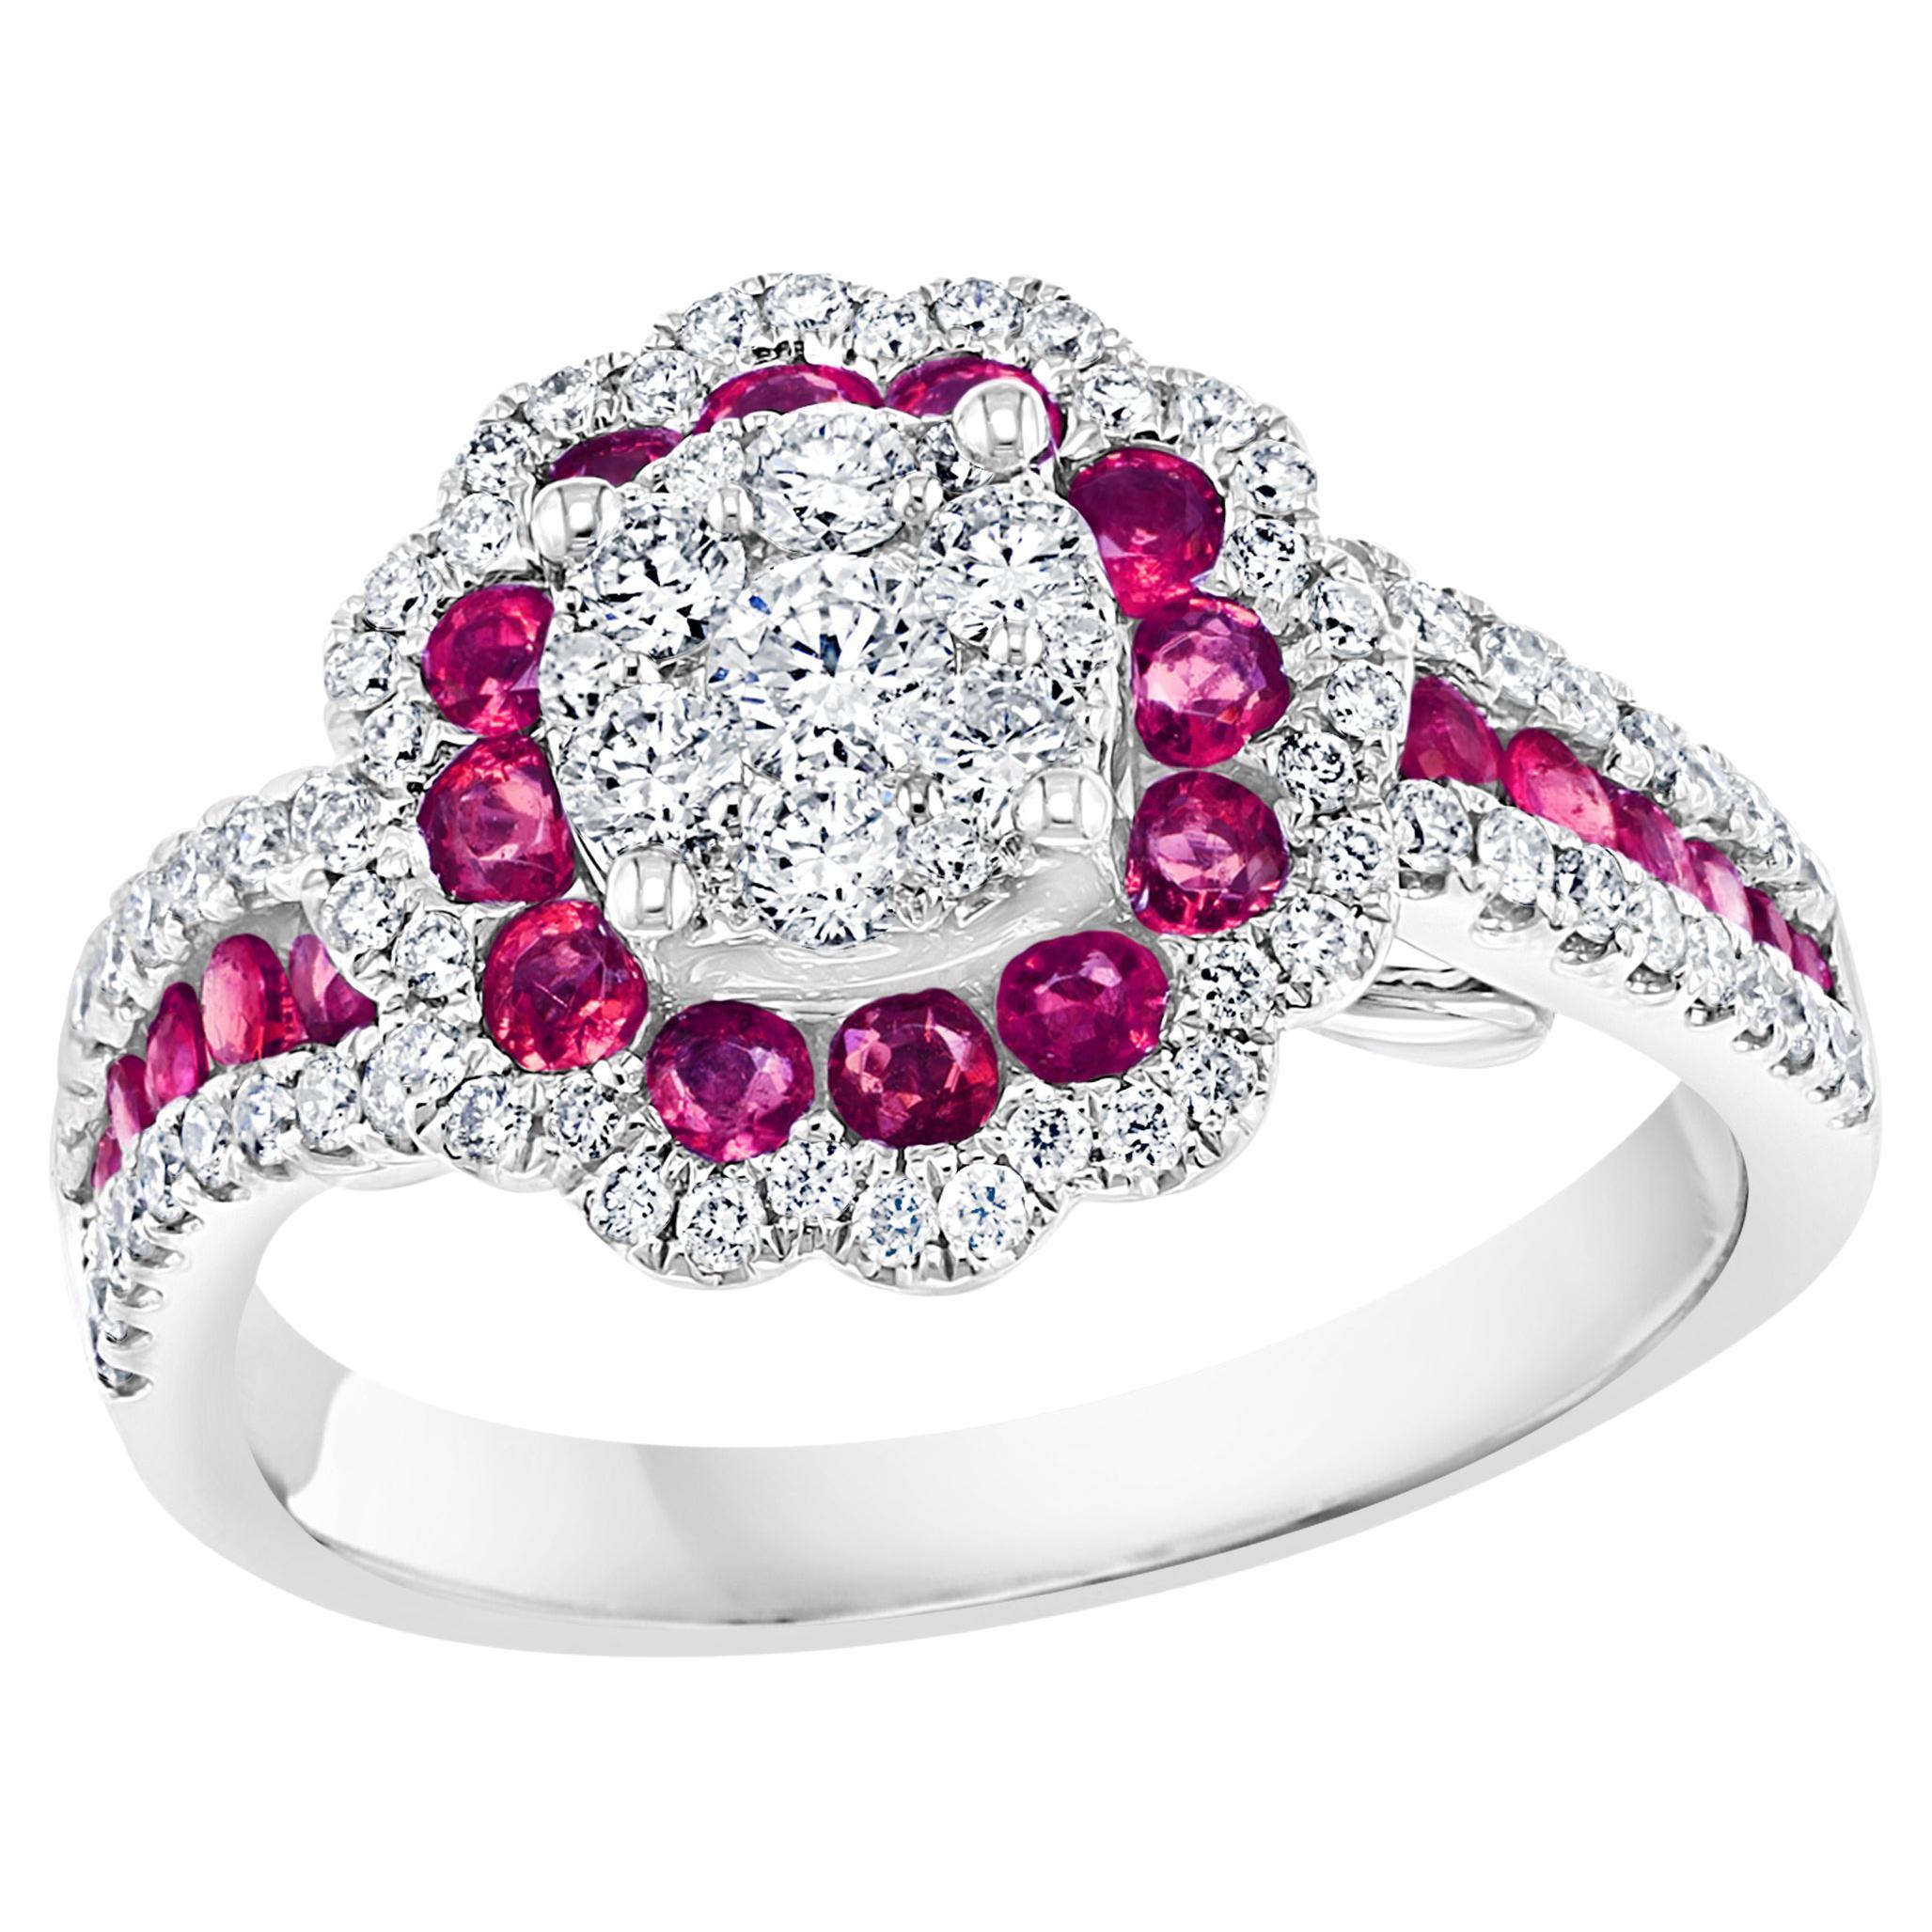 0.73 Carat of Ruby and Diamond Cocktail Ring in 18K White Gold For Sale